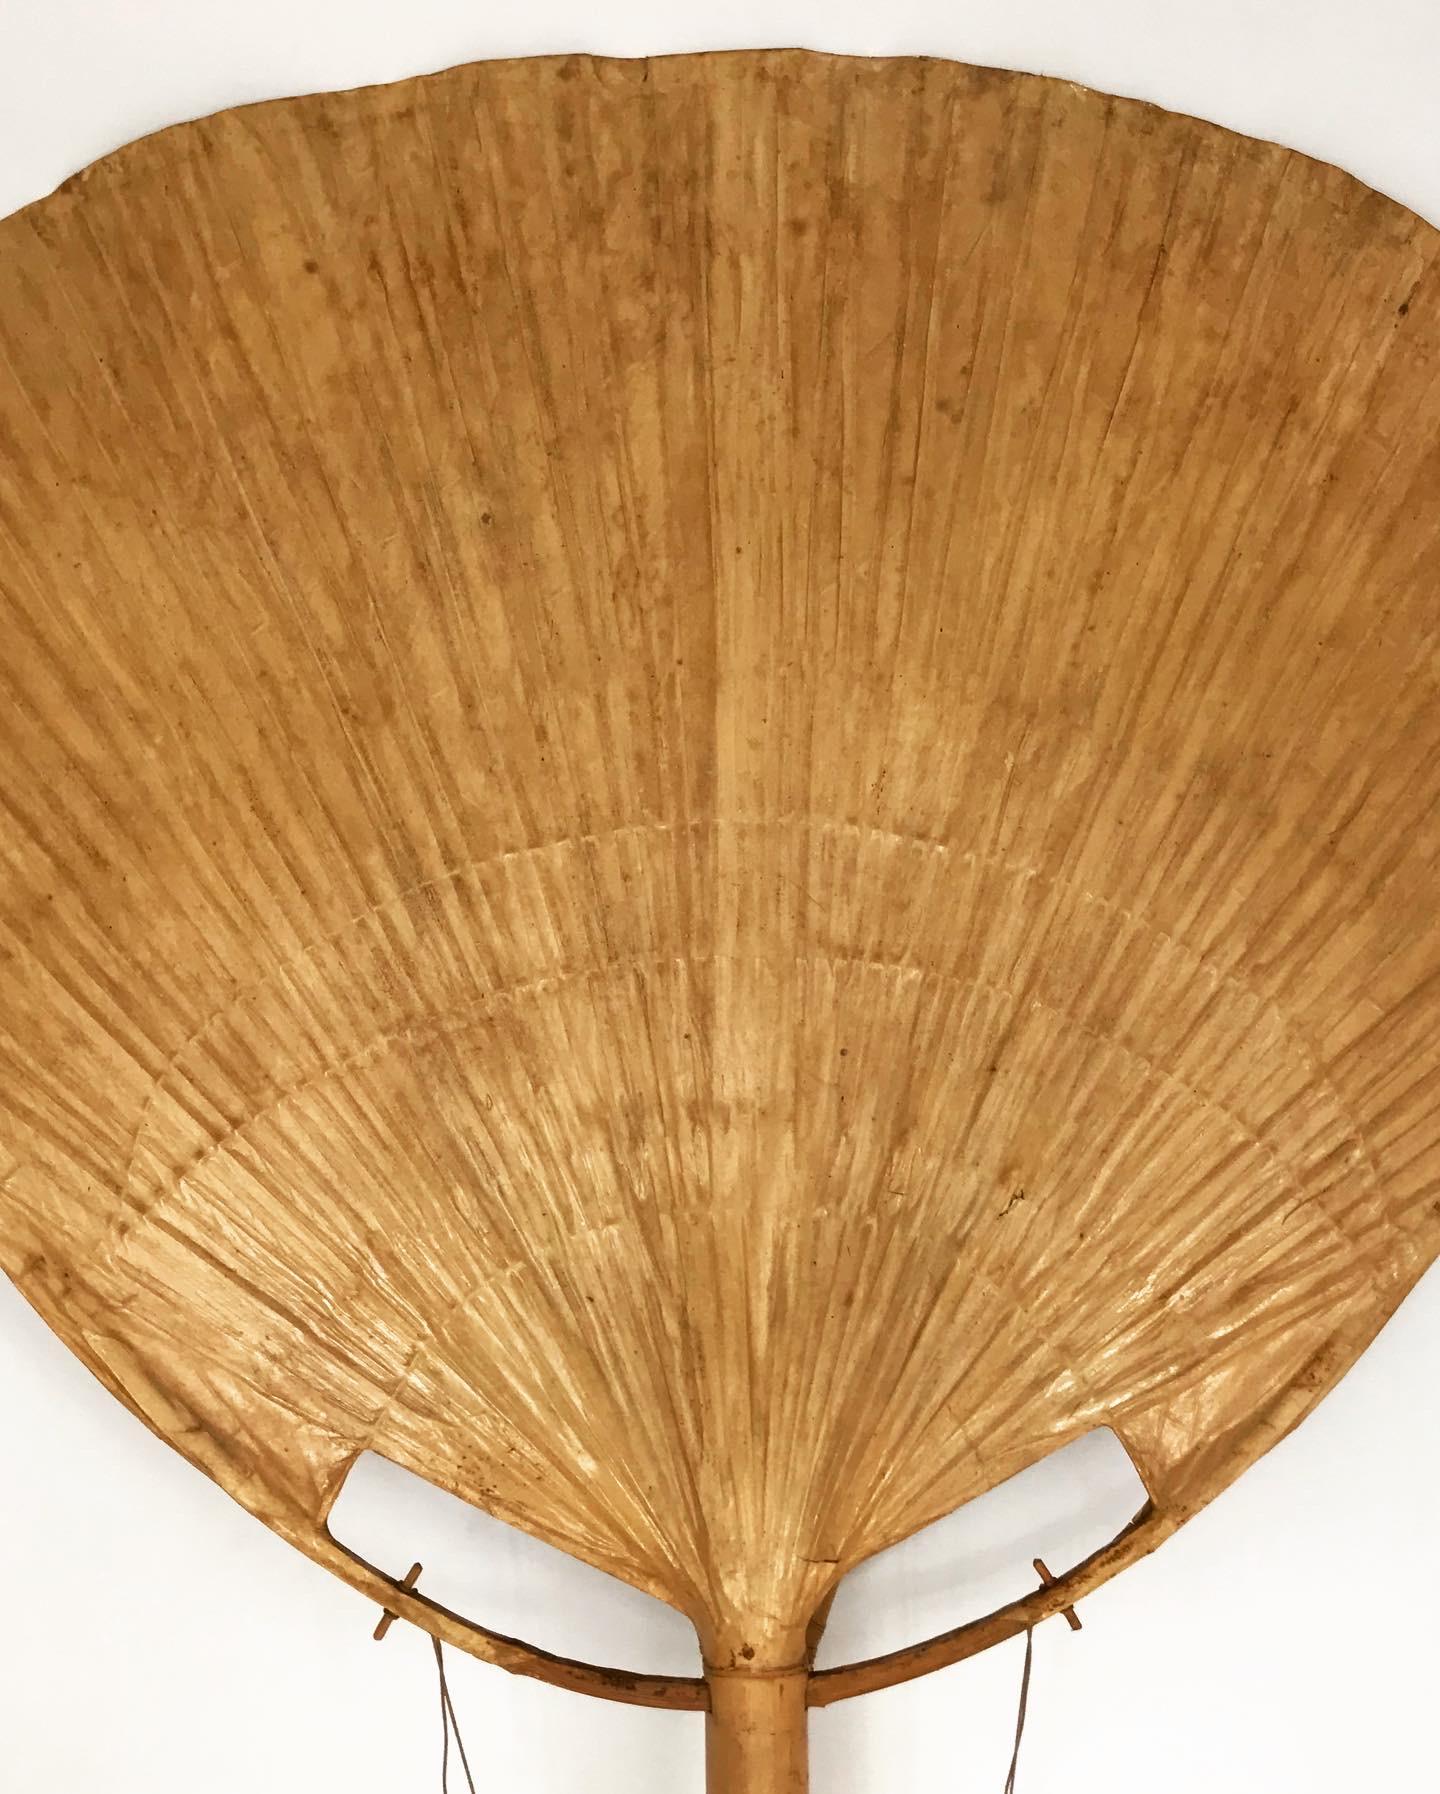 Rare large ‘Uchiwa’ fan floor lamp by Ingo Maurer in very good condition.

Designed by Ingo Maurer for M design, Germany.

This lamp was handmade in 1977 from bamboo, wicker and Japanese rice paper.
  